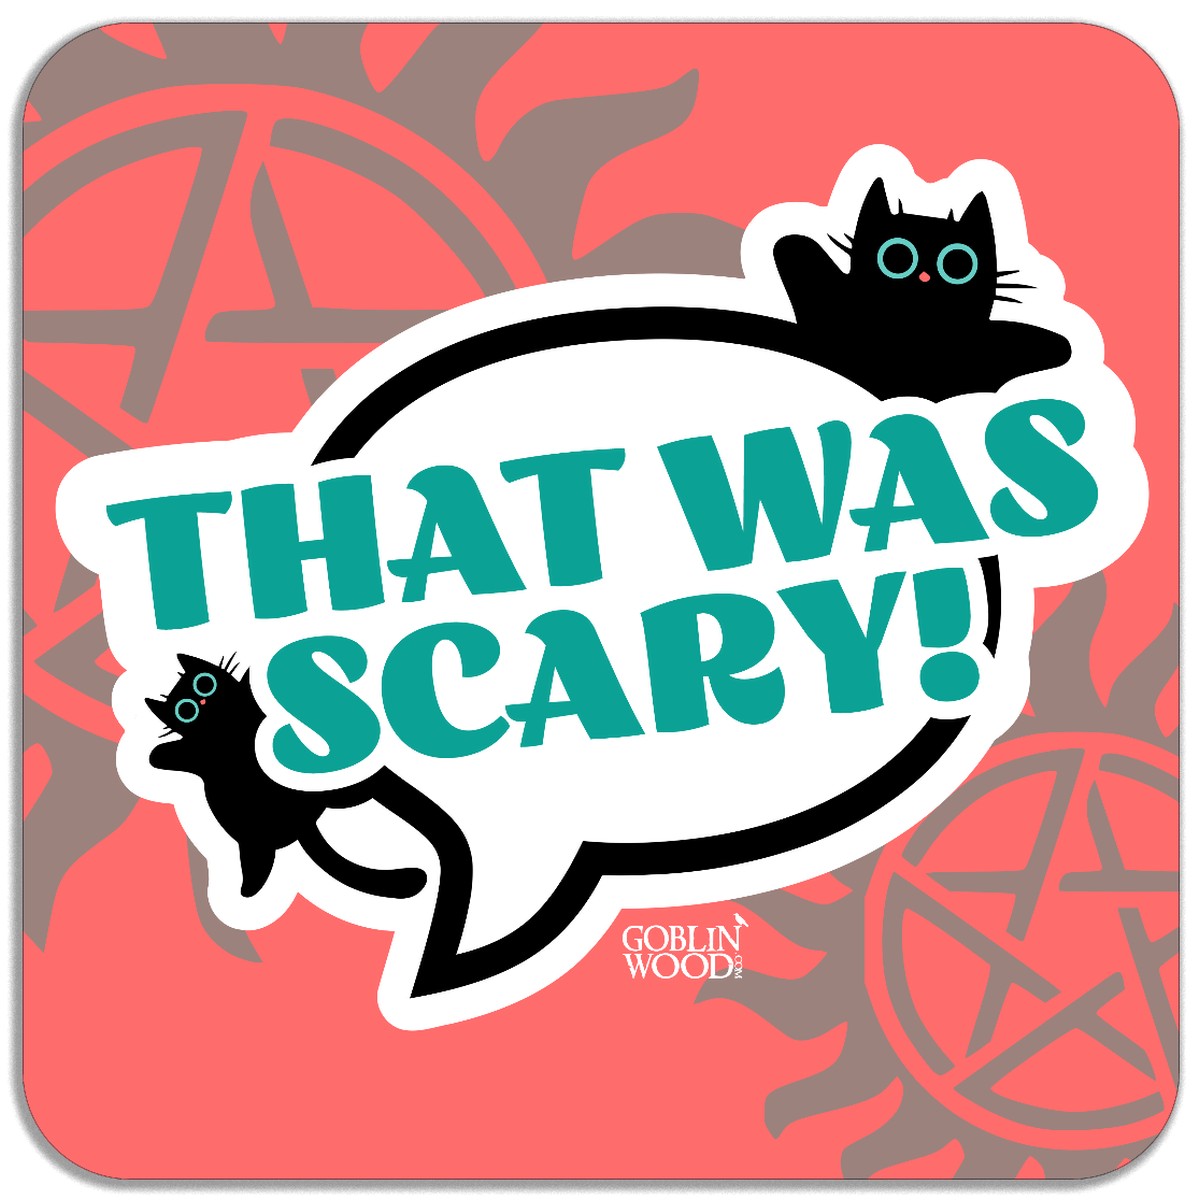 That Was Scary! Speech Bubble Magnet - Supernatural Inspired - Goblin Wood Exclusive